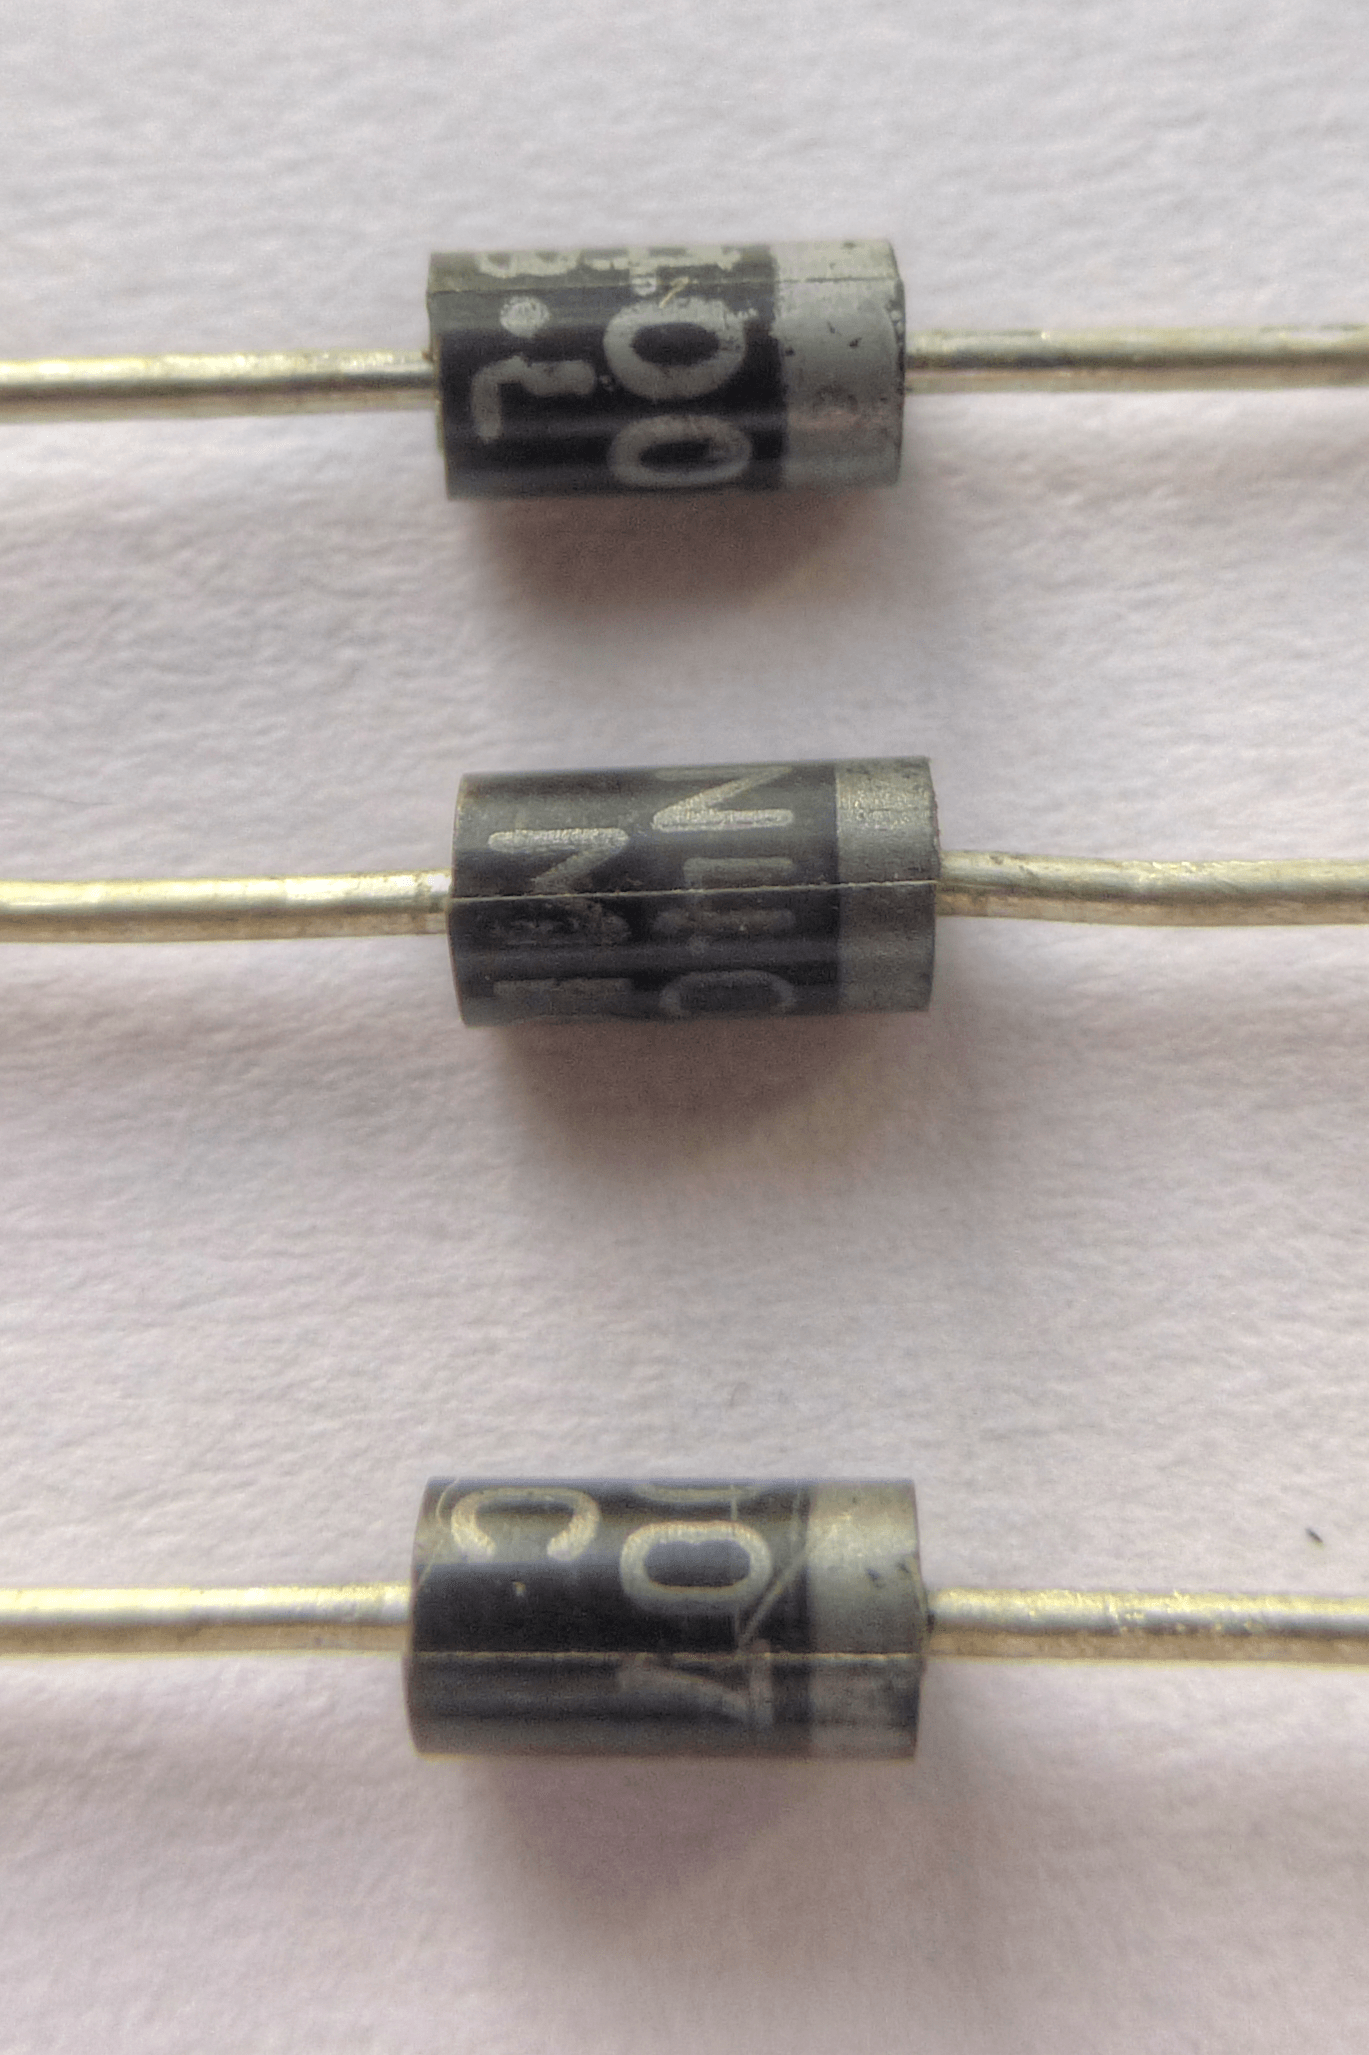  Power diode